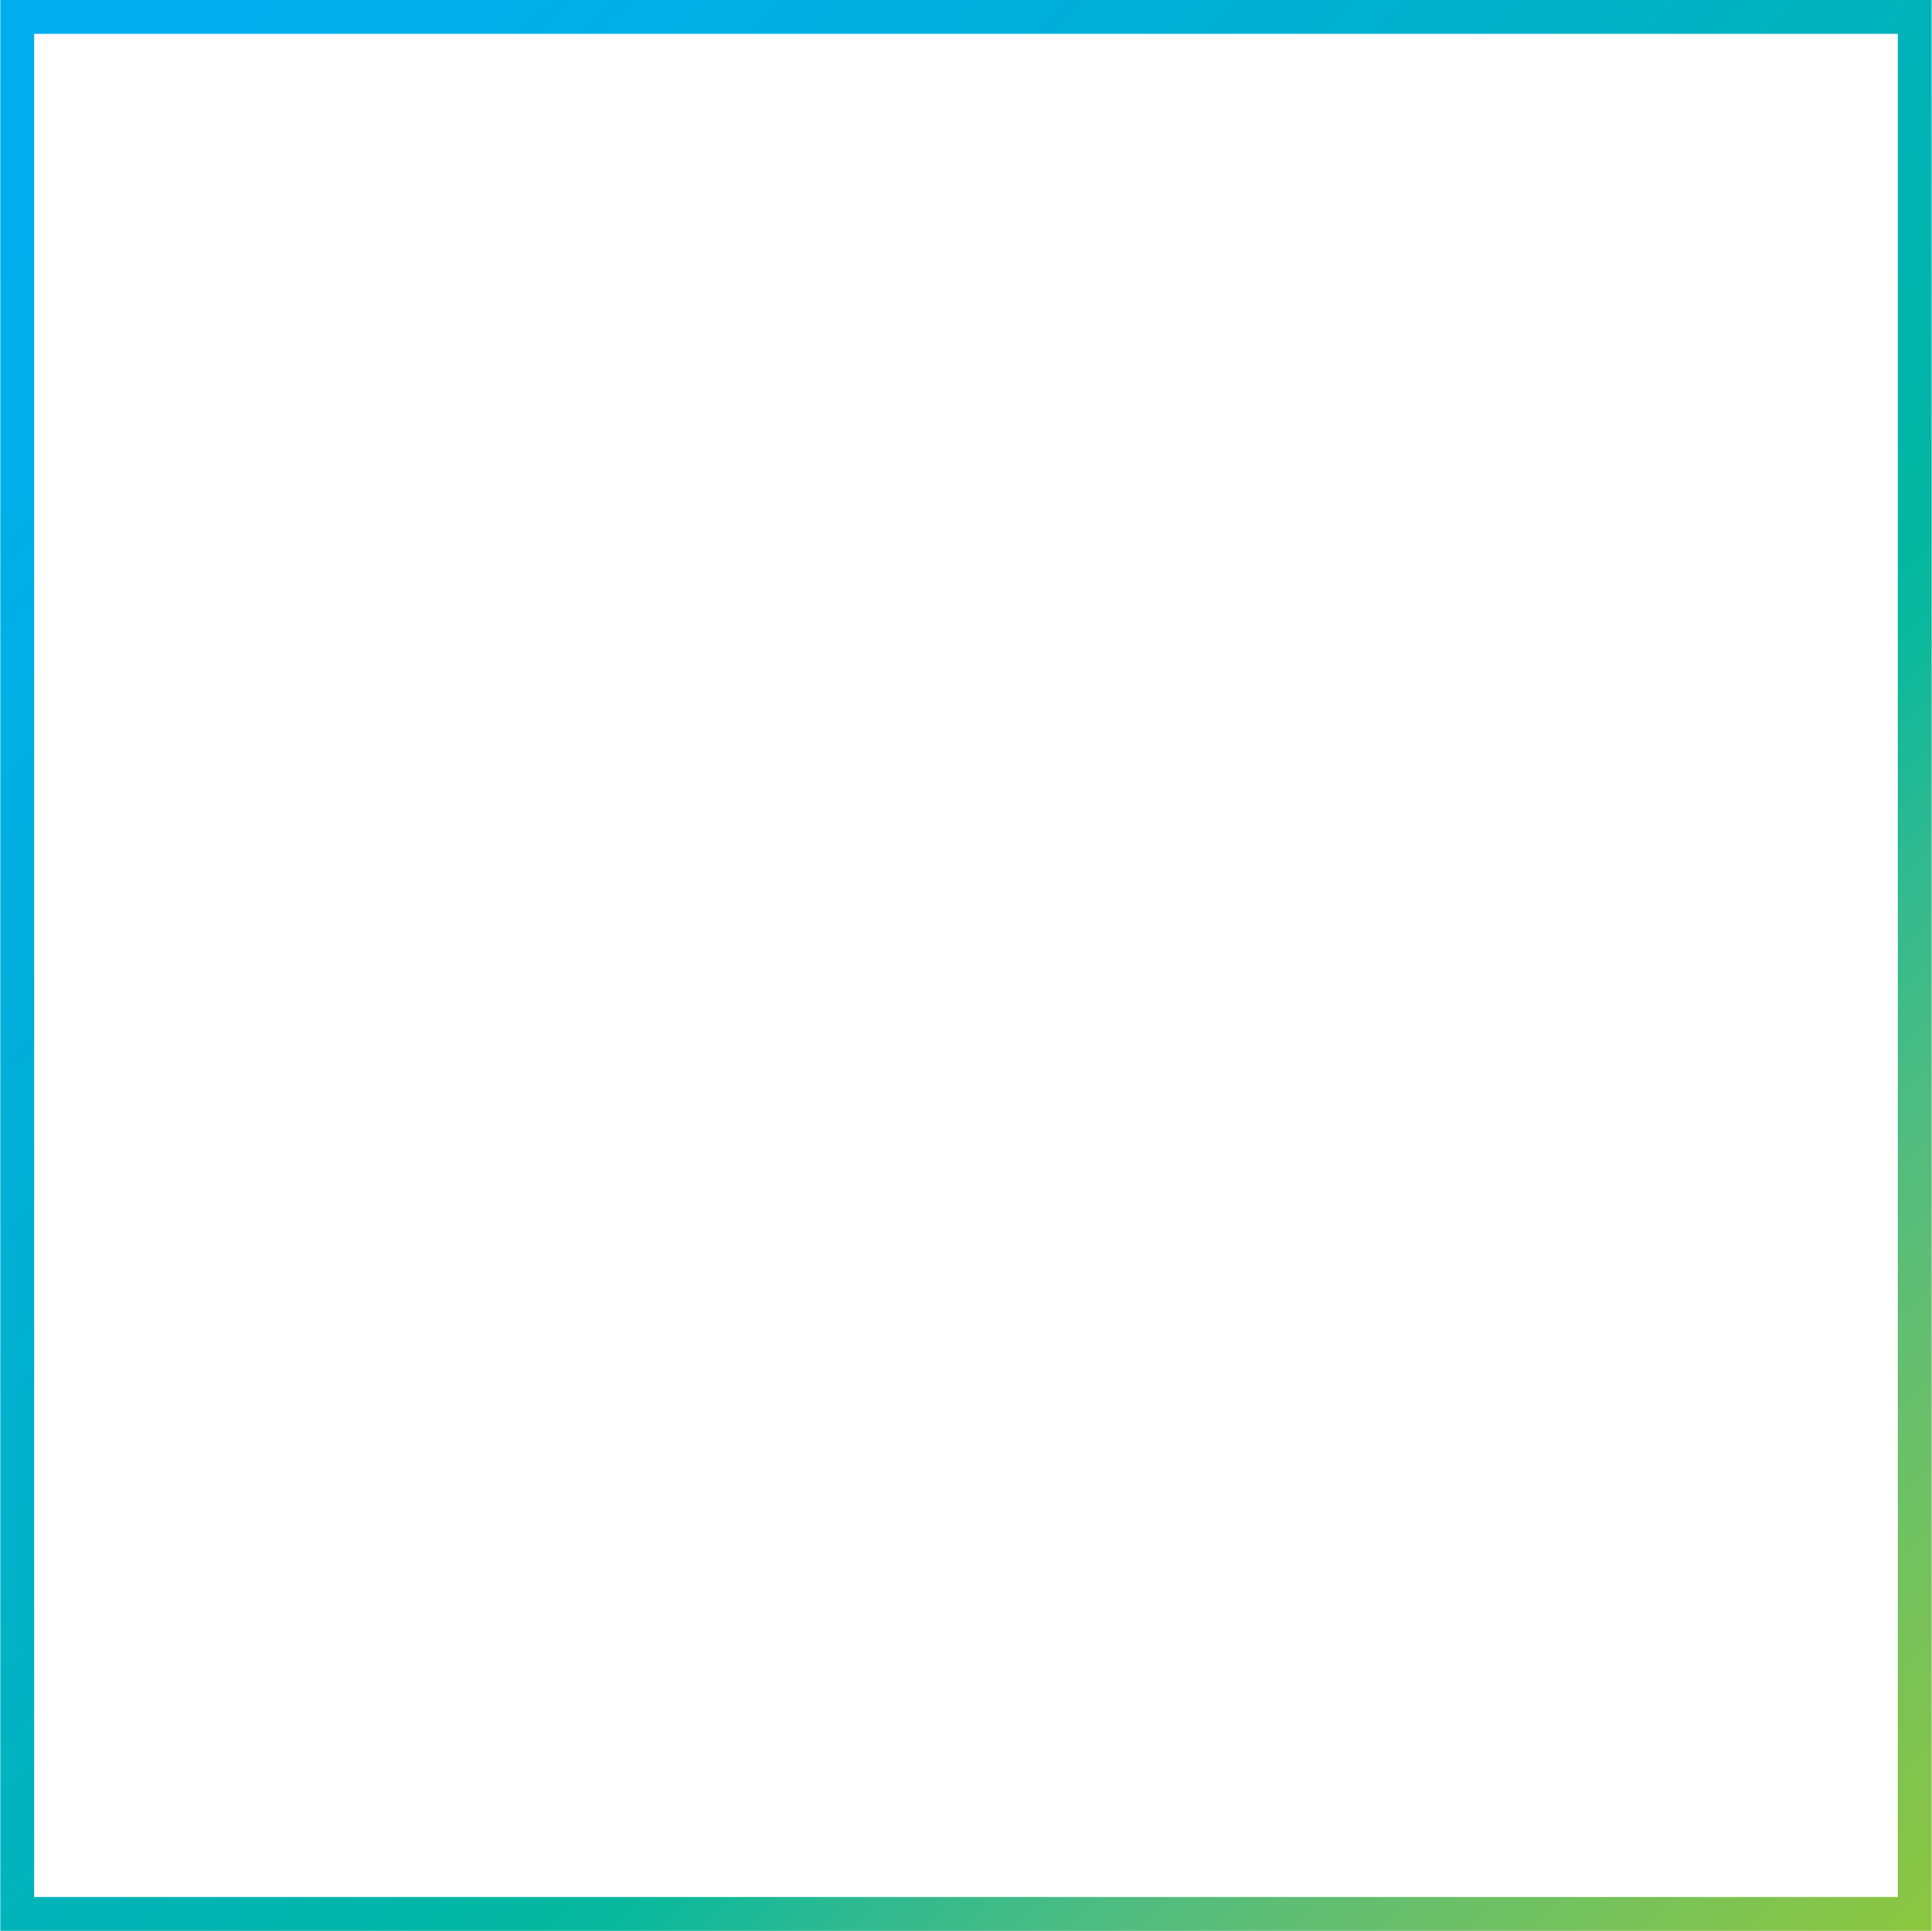 CAR MBS 2024 Logo, Management Briefing Seminars, Center for Automotive Research